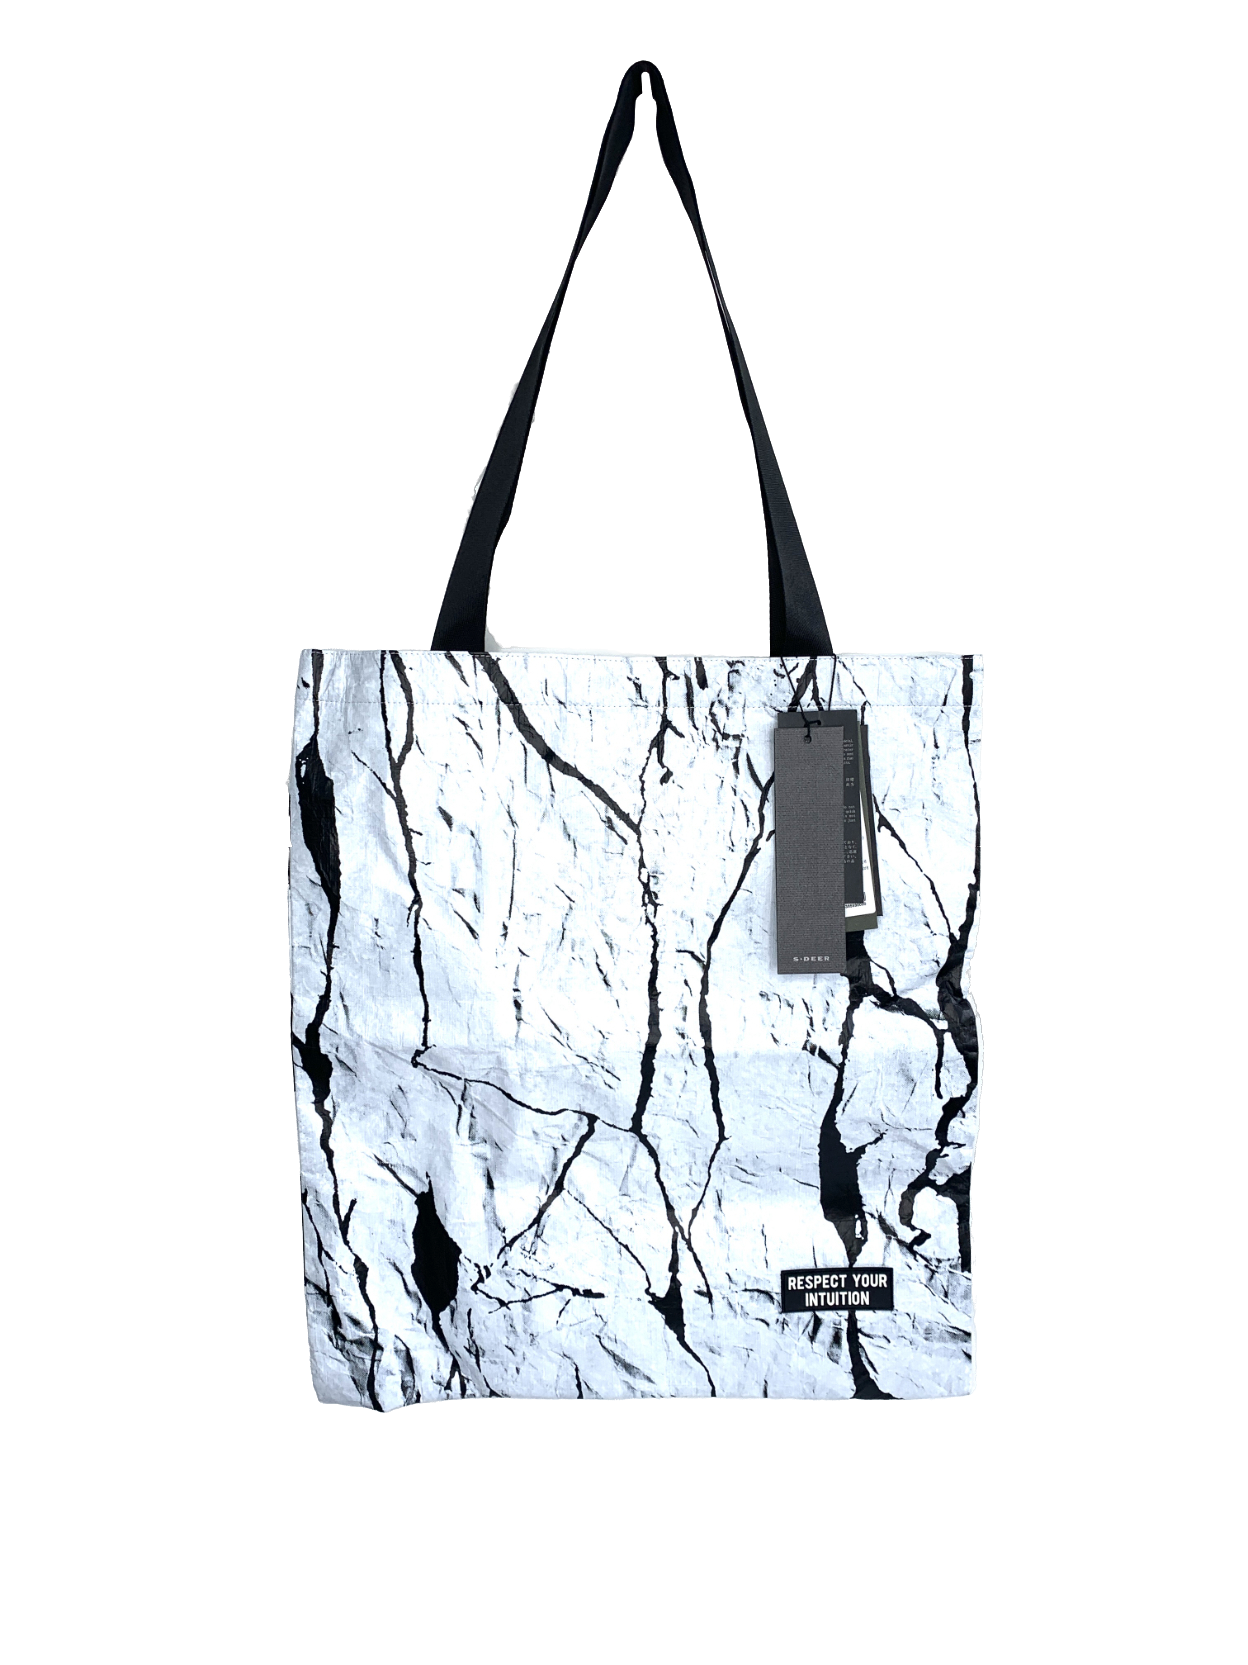 S.DEER Grey Respect Your Intuition Tote Bag One Size